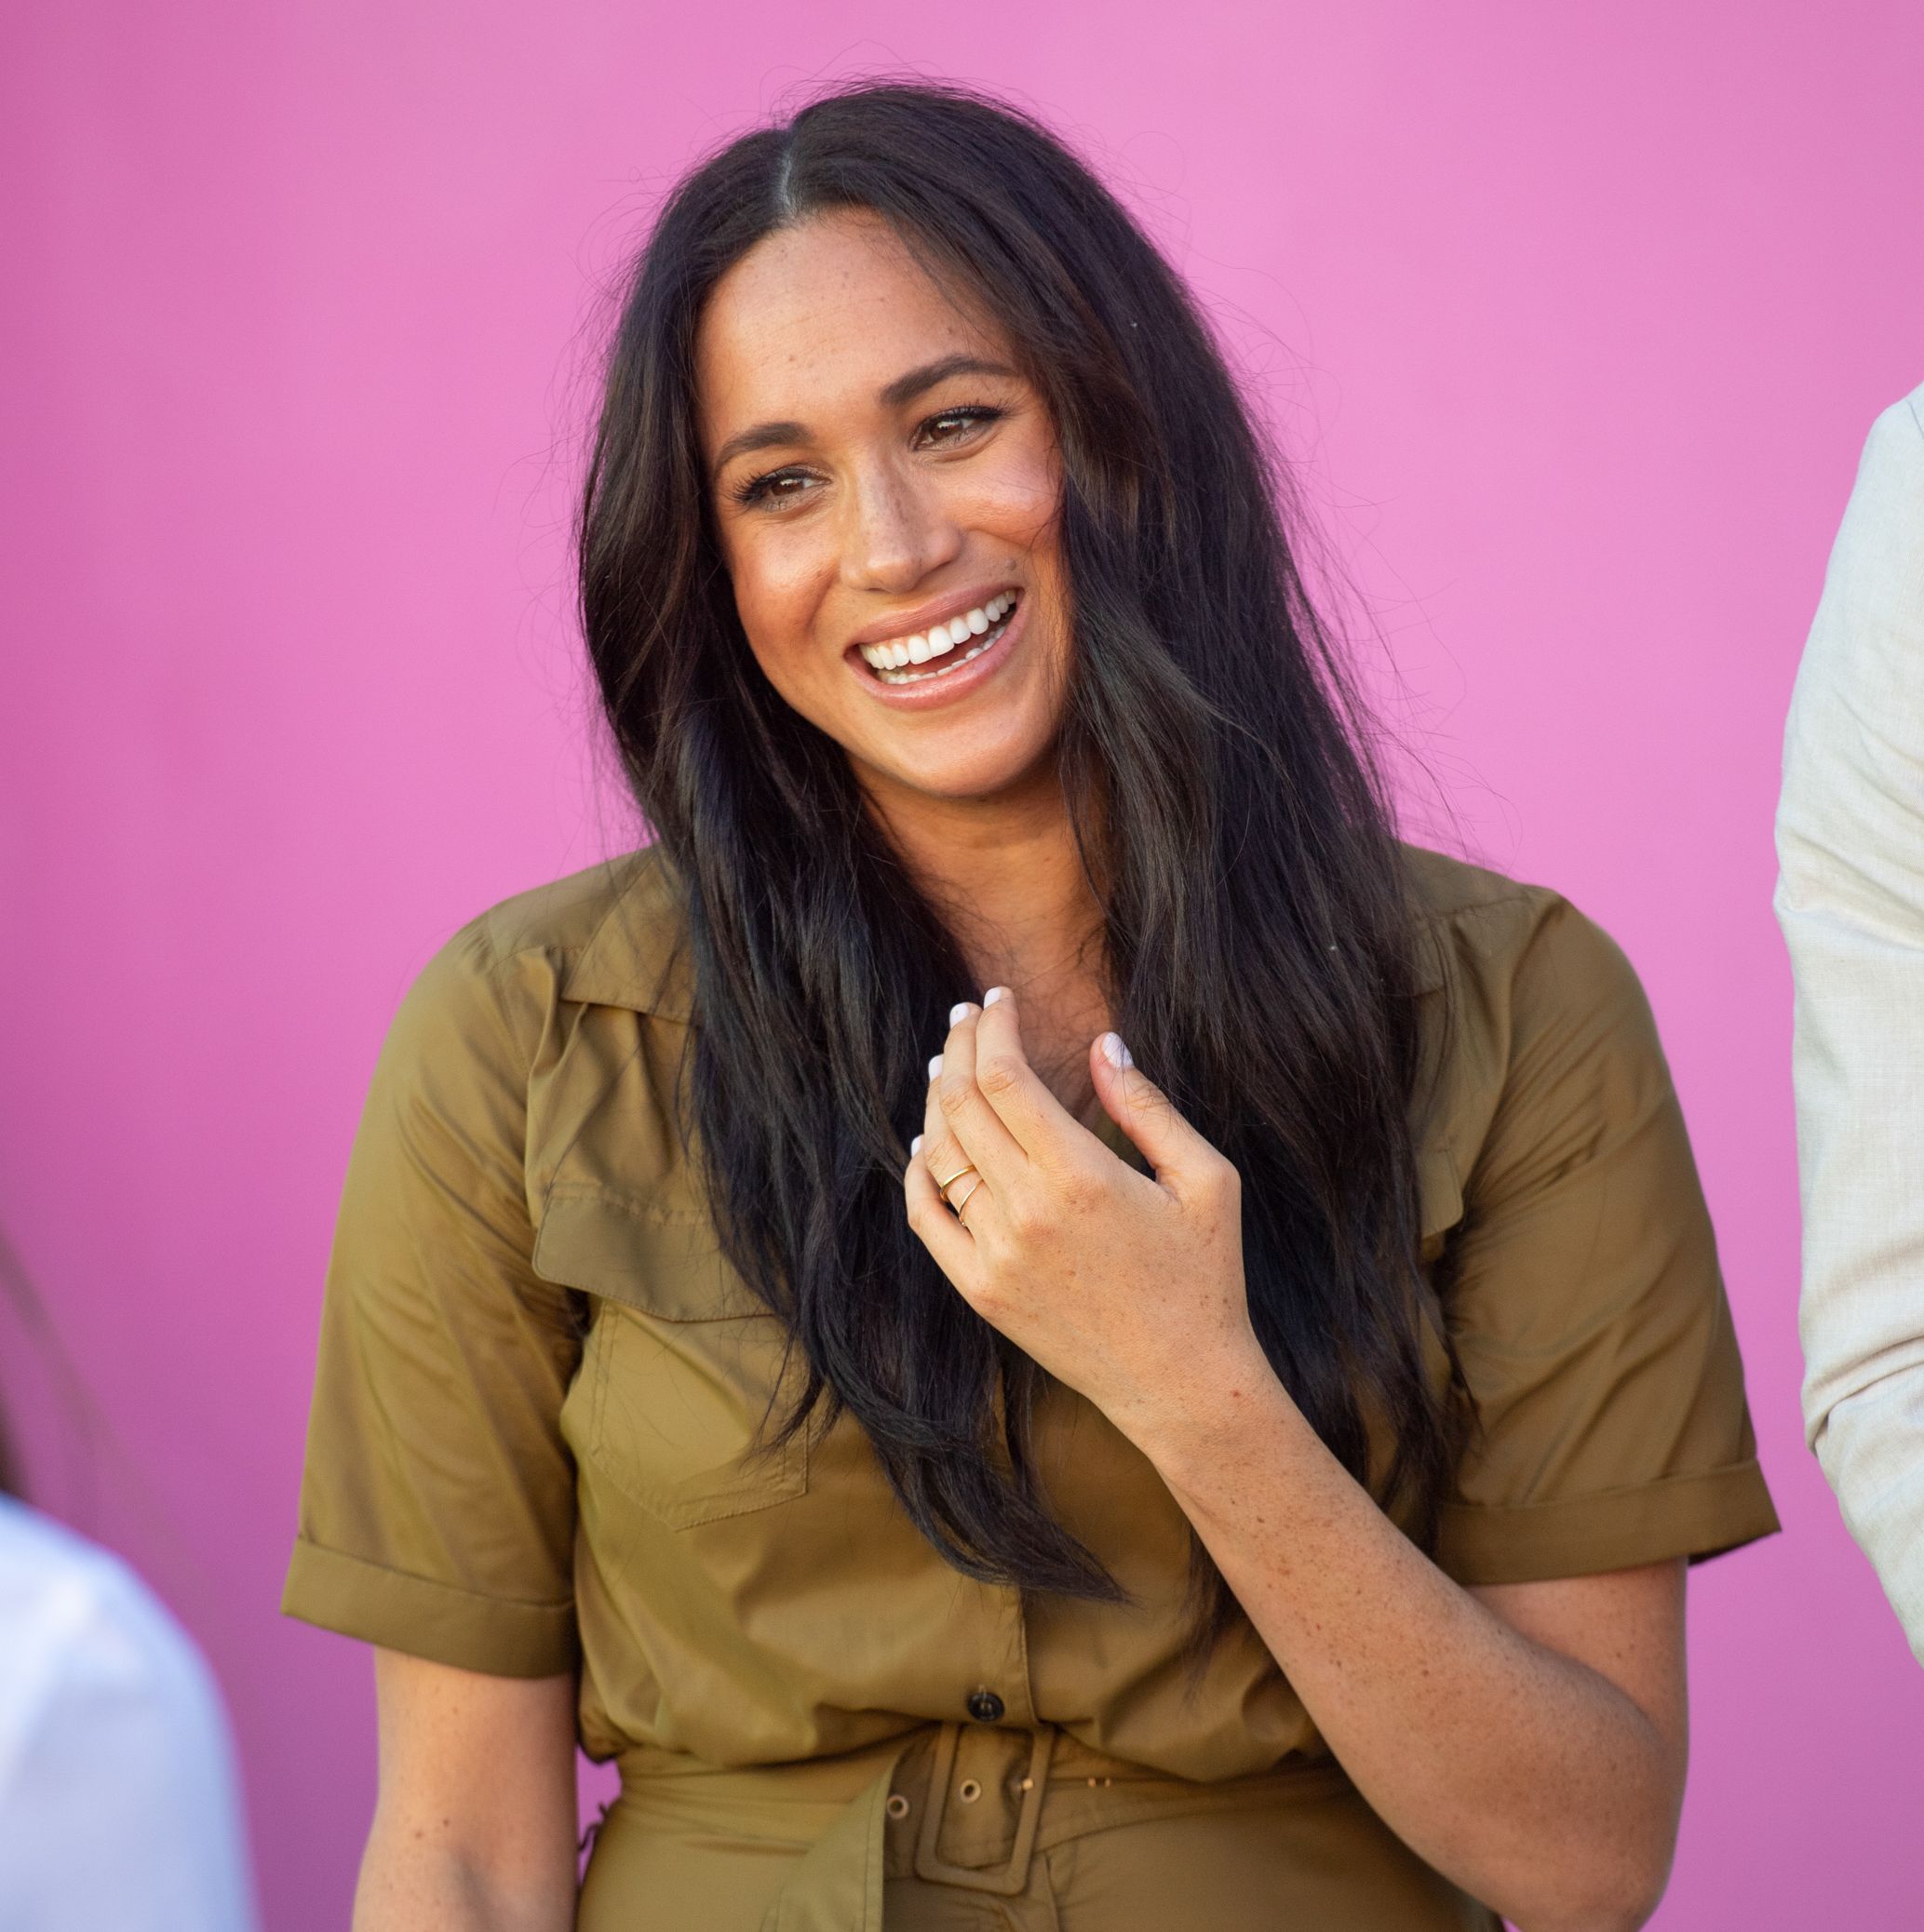 Meghan Markle Contributed Her Lemon Olive Oil Cake Recipe to a New Cookbook From Chef José Andrés